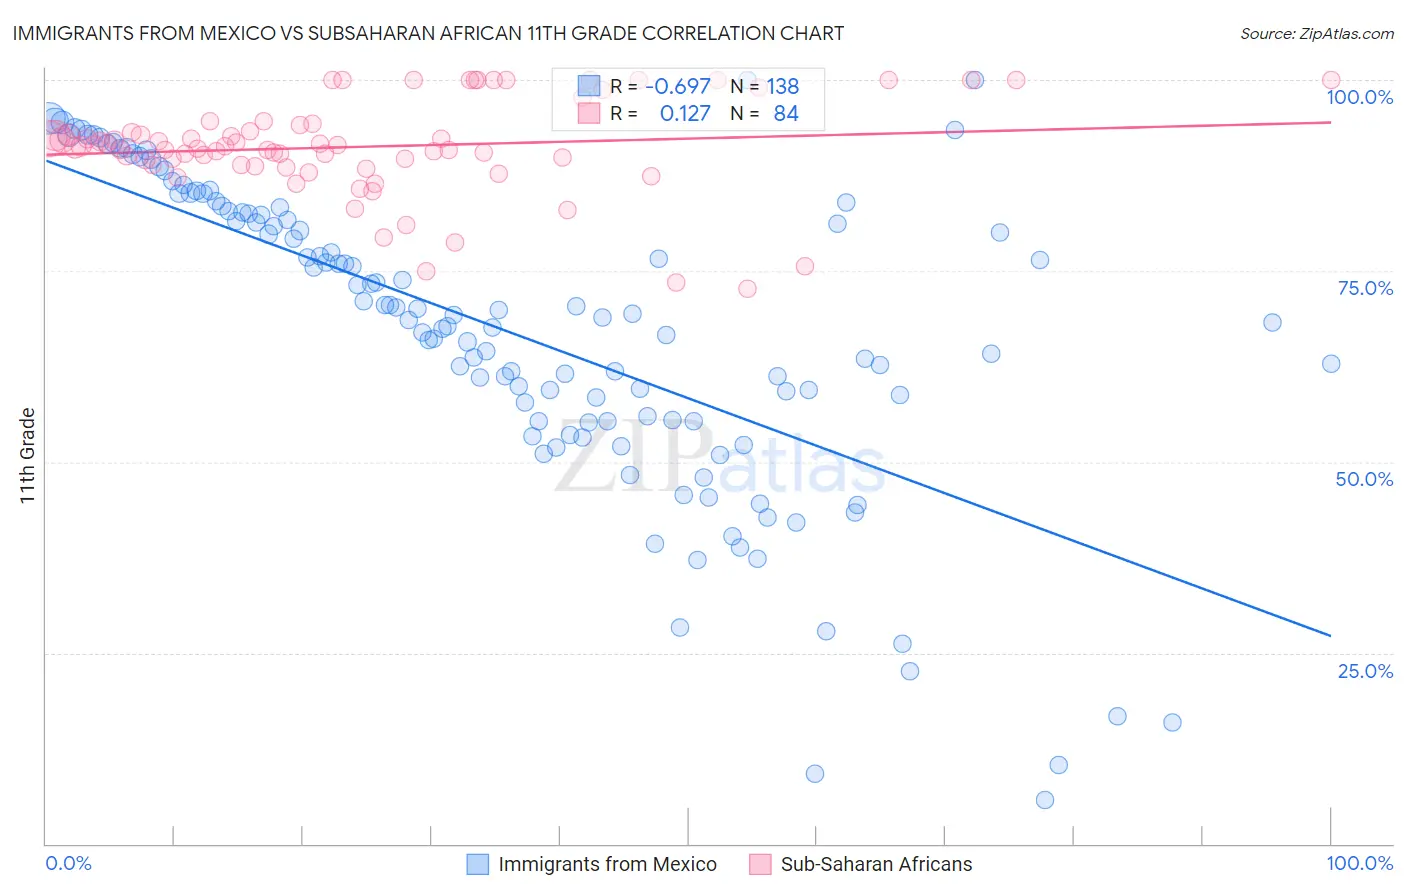 Immigrants from Mexico vs Subsaharan African 11th Grade